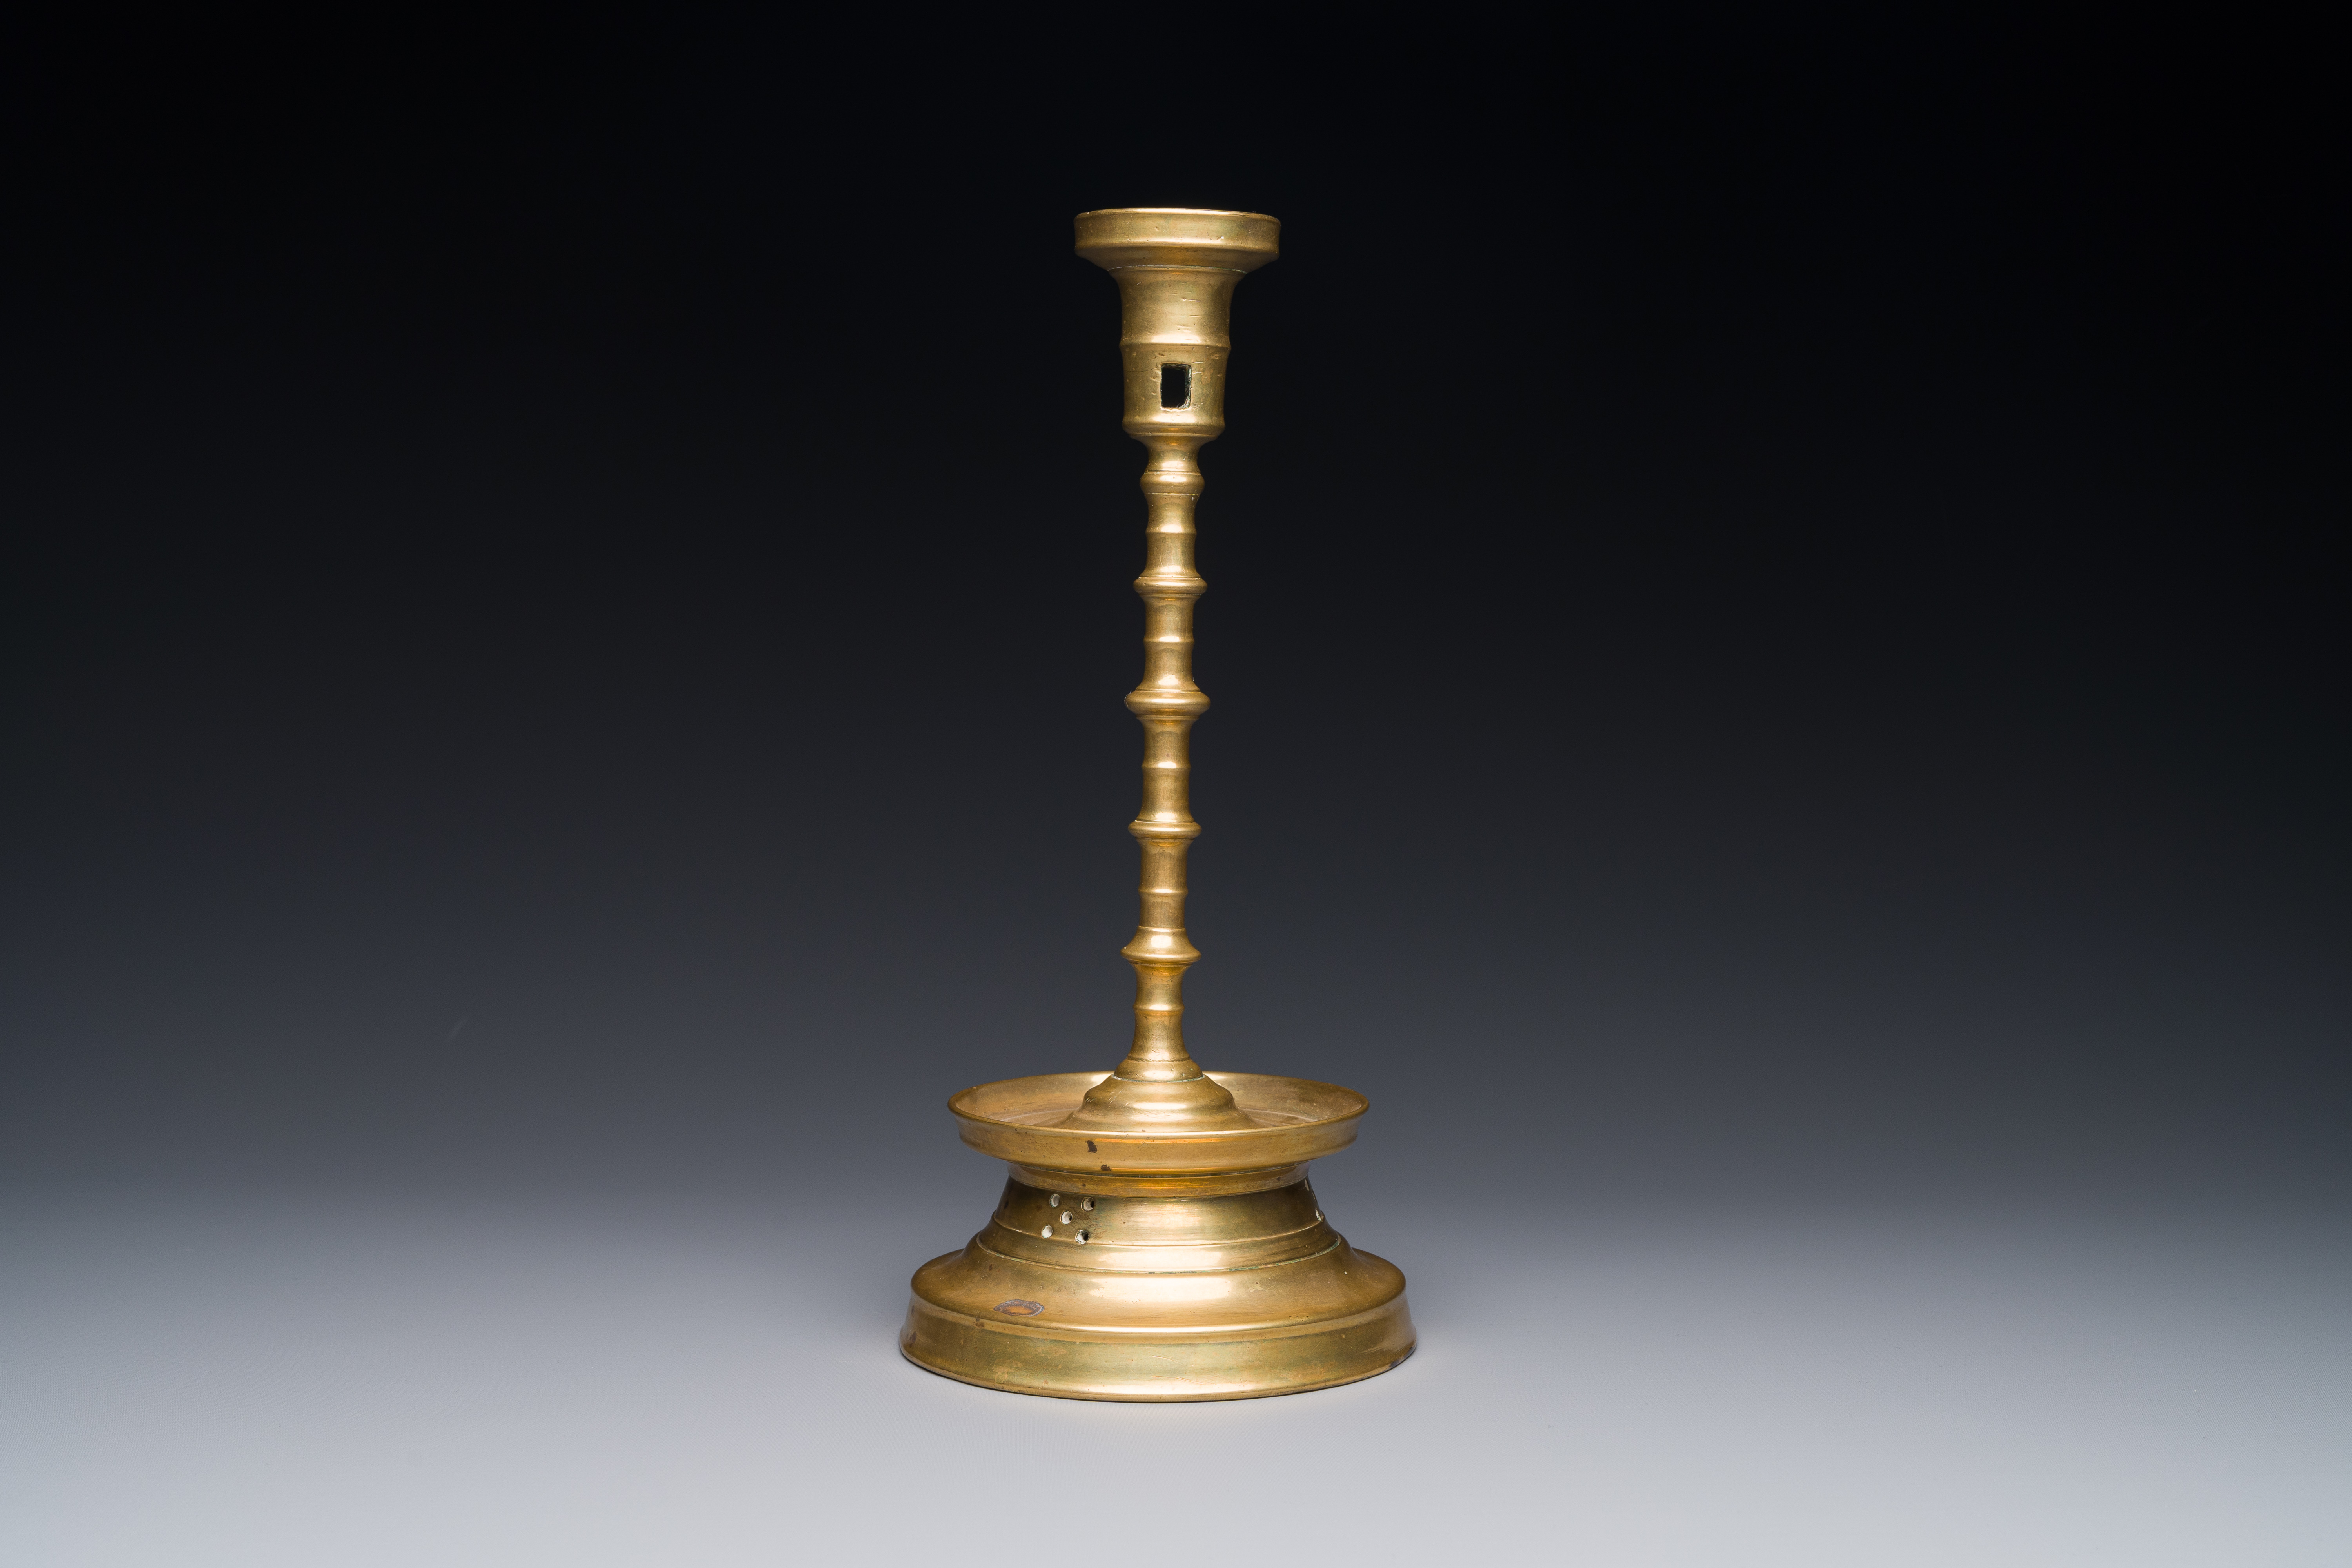 A knotted bronze candlestick, Southern Netherlands, probably 16th C. - Image 6 of 15